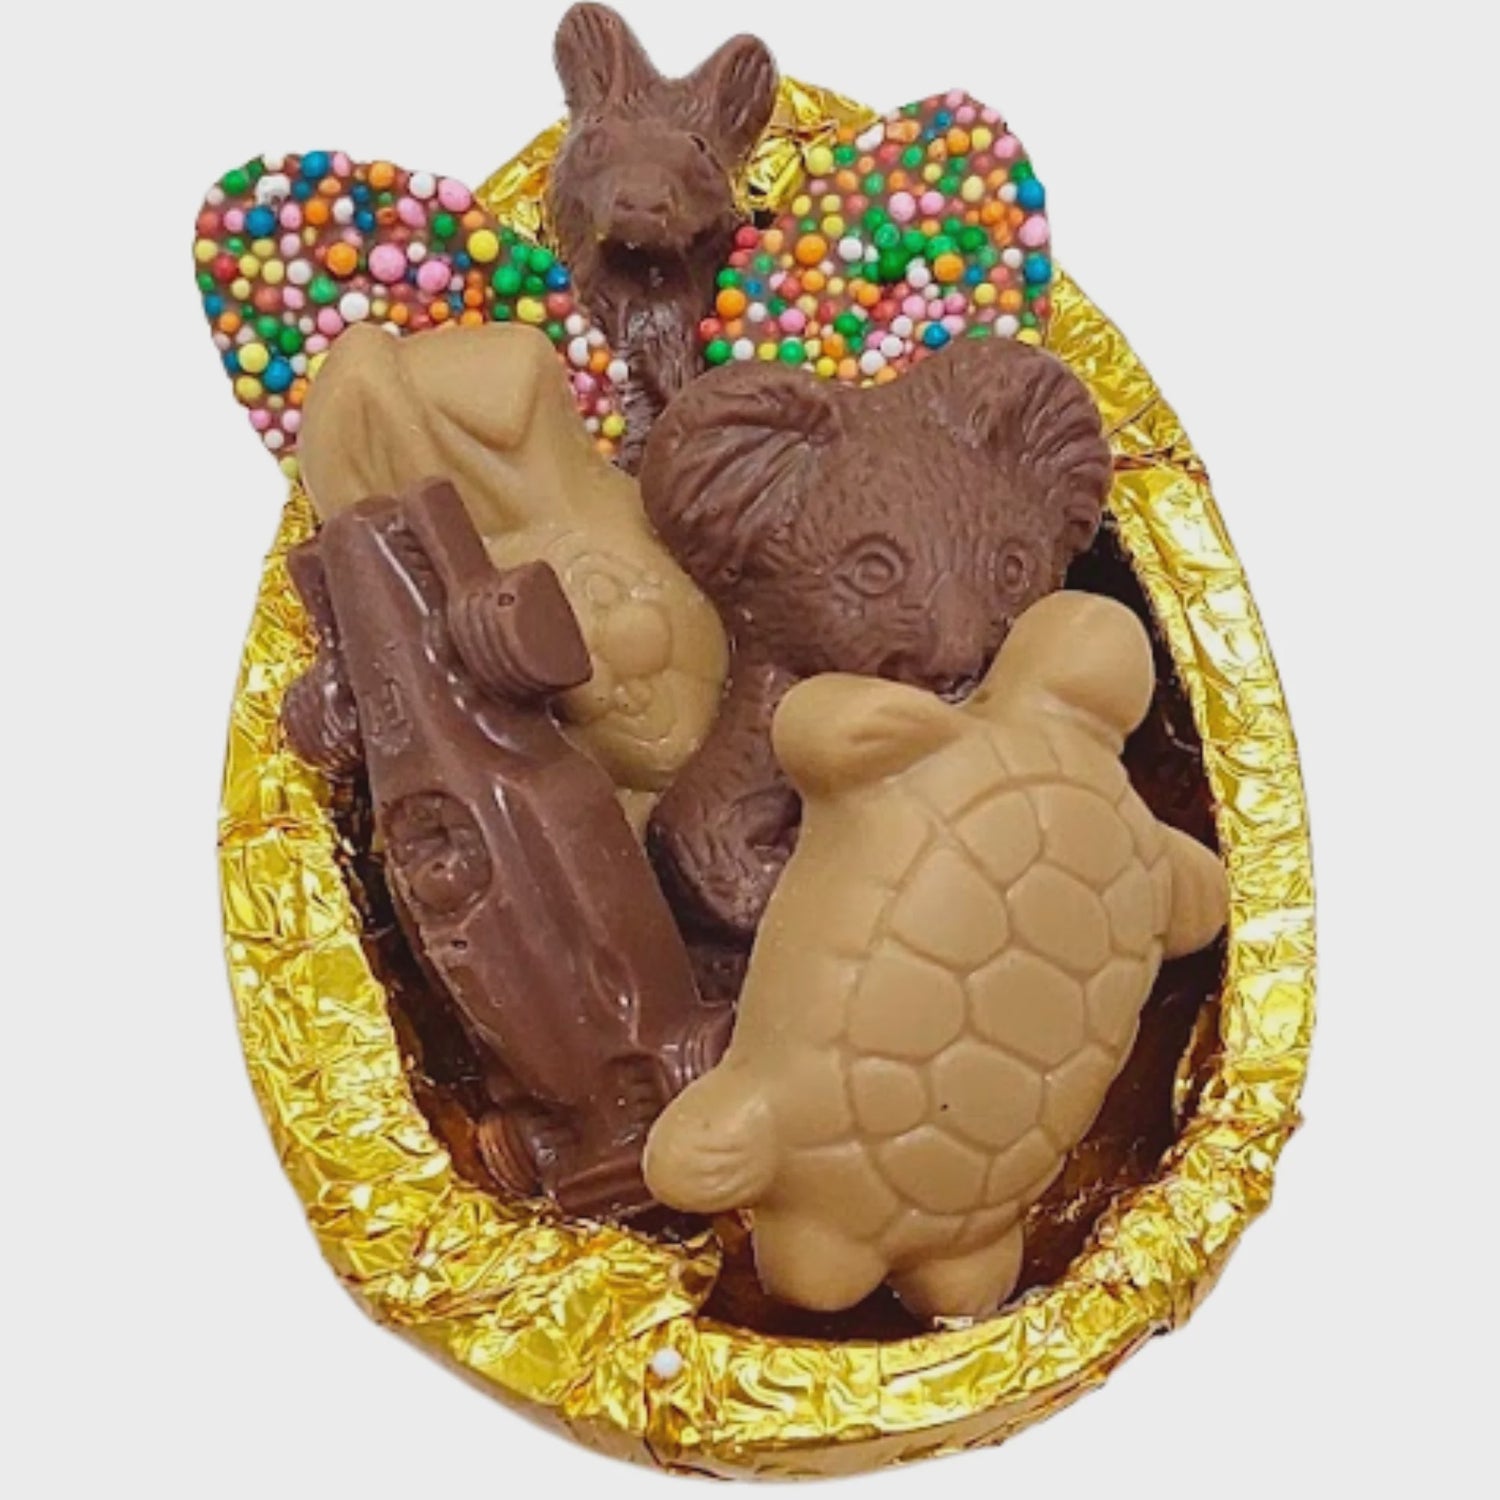 Milk Chocolate Half Easter Egg With Mixed Chocolates